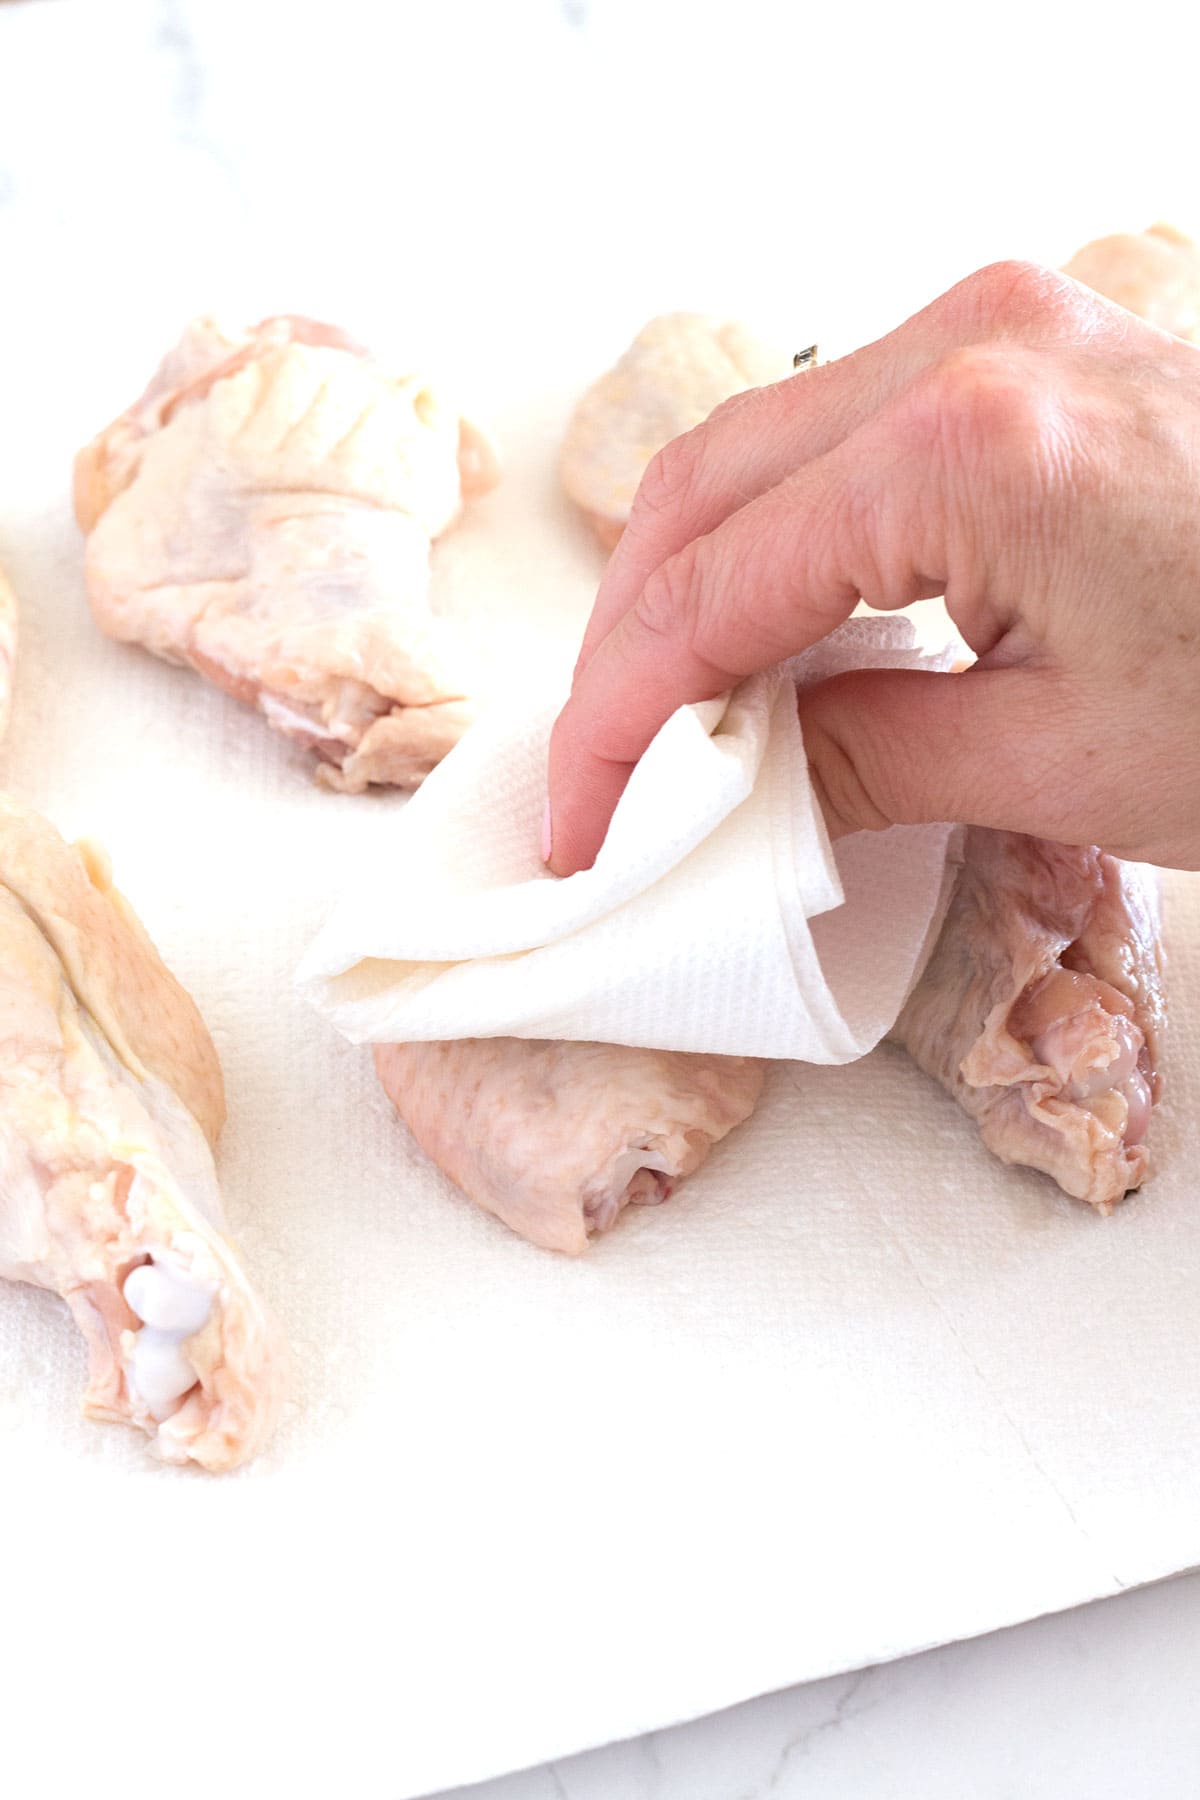 Using a paper towel to dry all the liquid off the chicken wings.